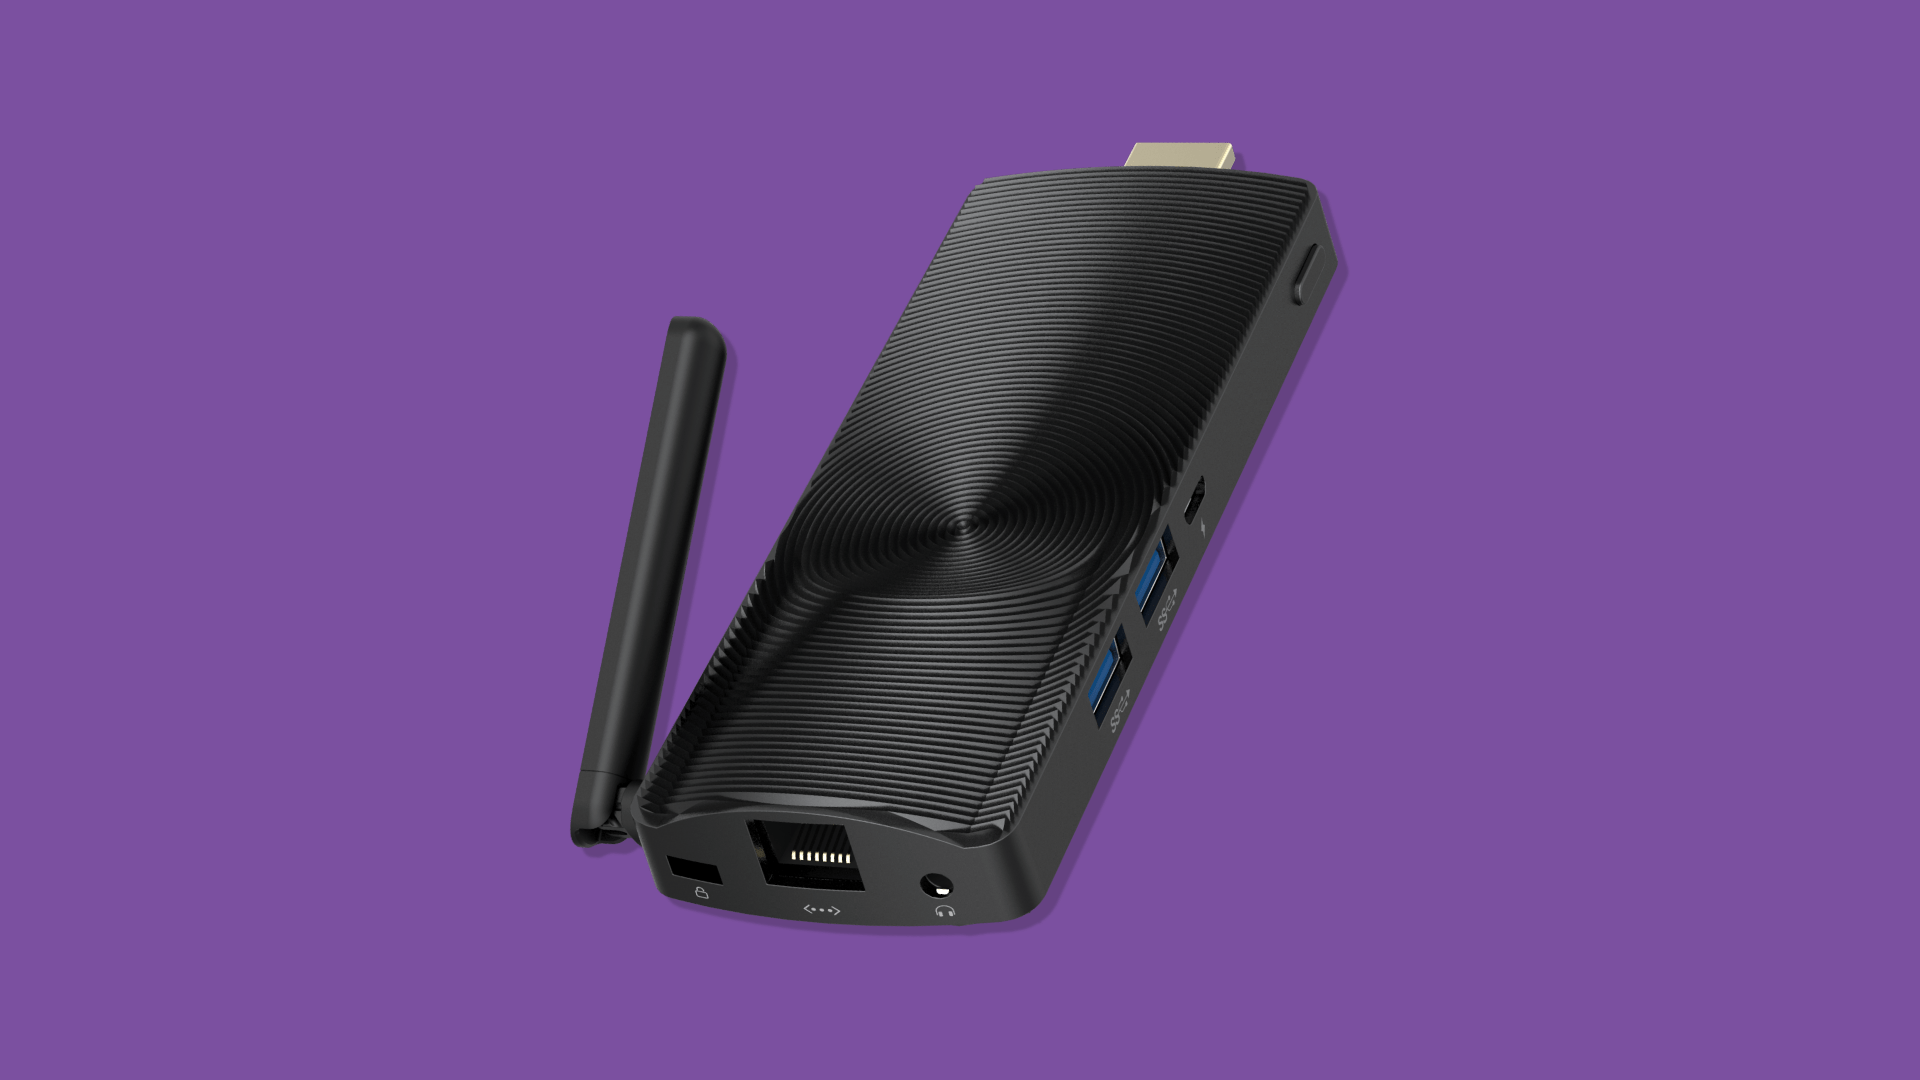 Mini PCs from Azulle – Access3 Review | TechInform